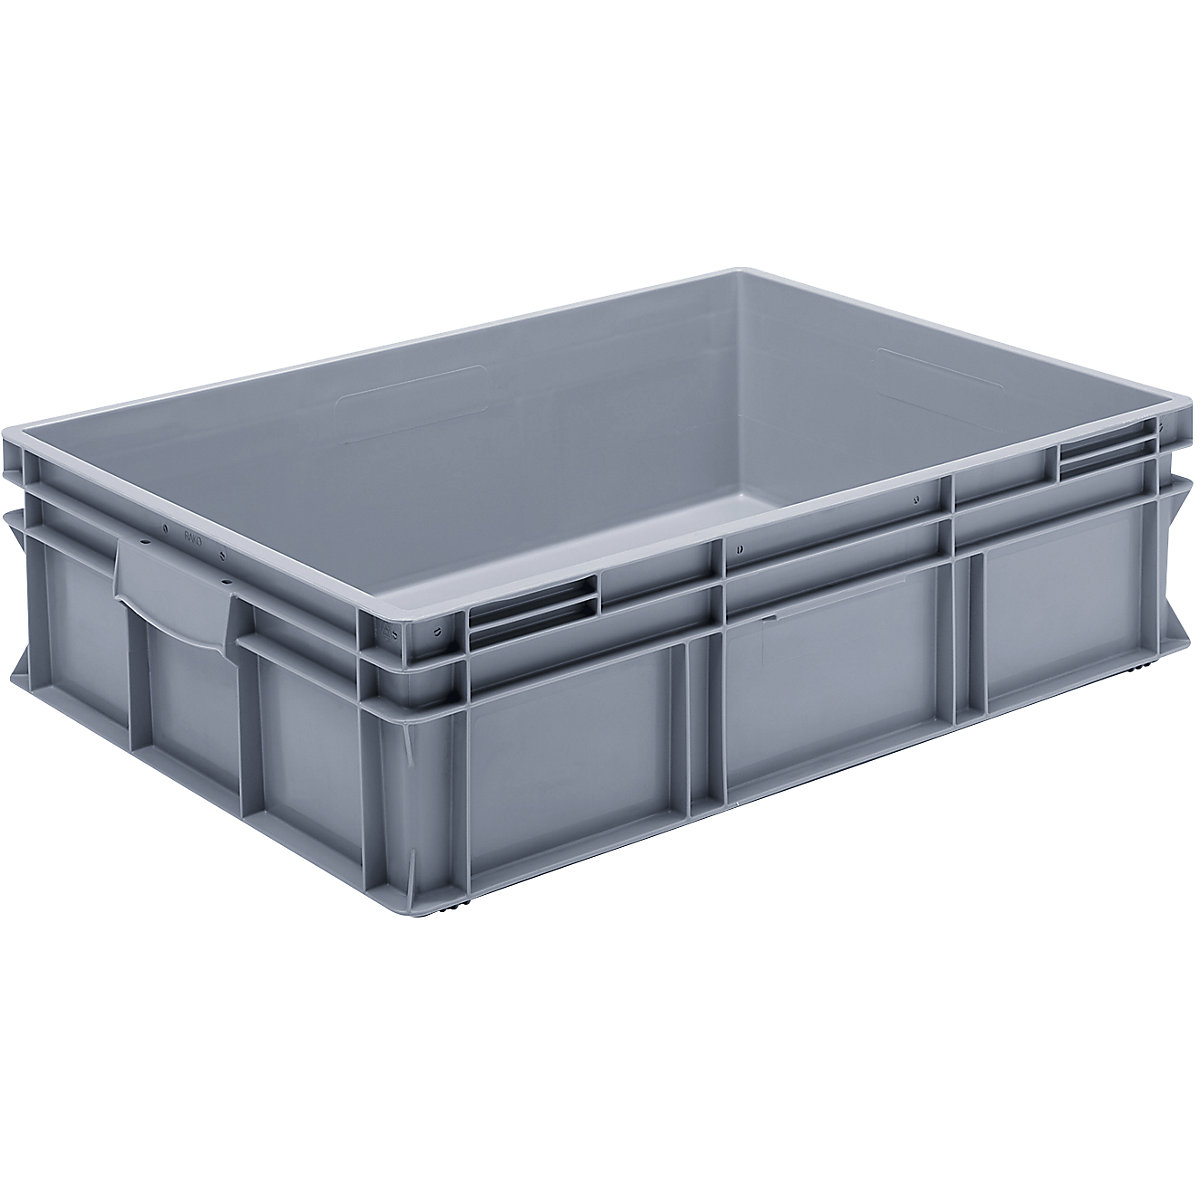 Euro stacking container made of polypropylene (PP), max. load 20 kg, silver grey, capacity 90 l, external height 220 mm, pack of 2